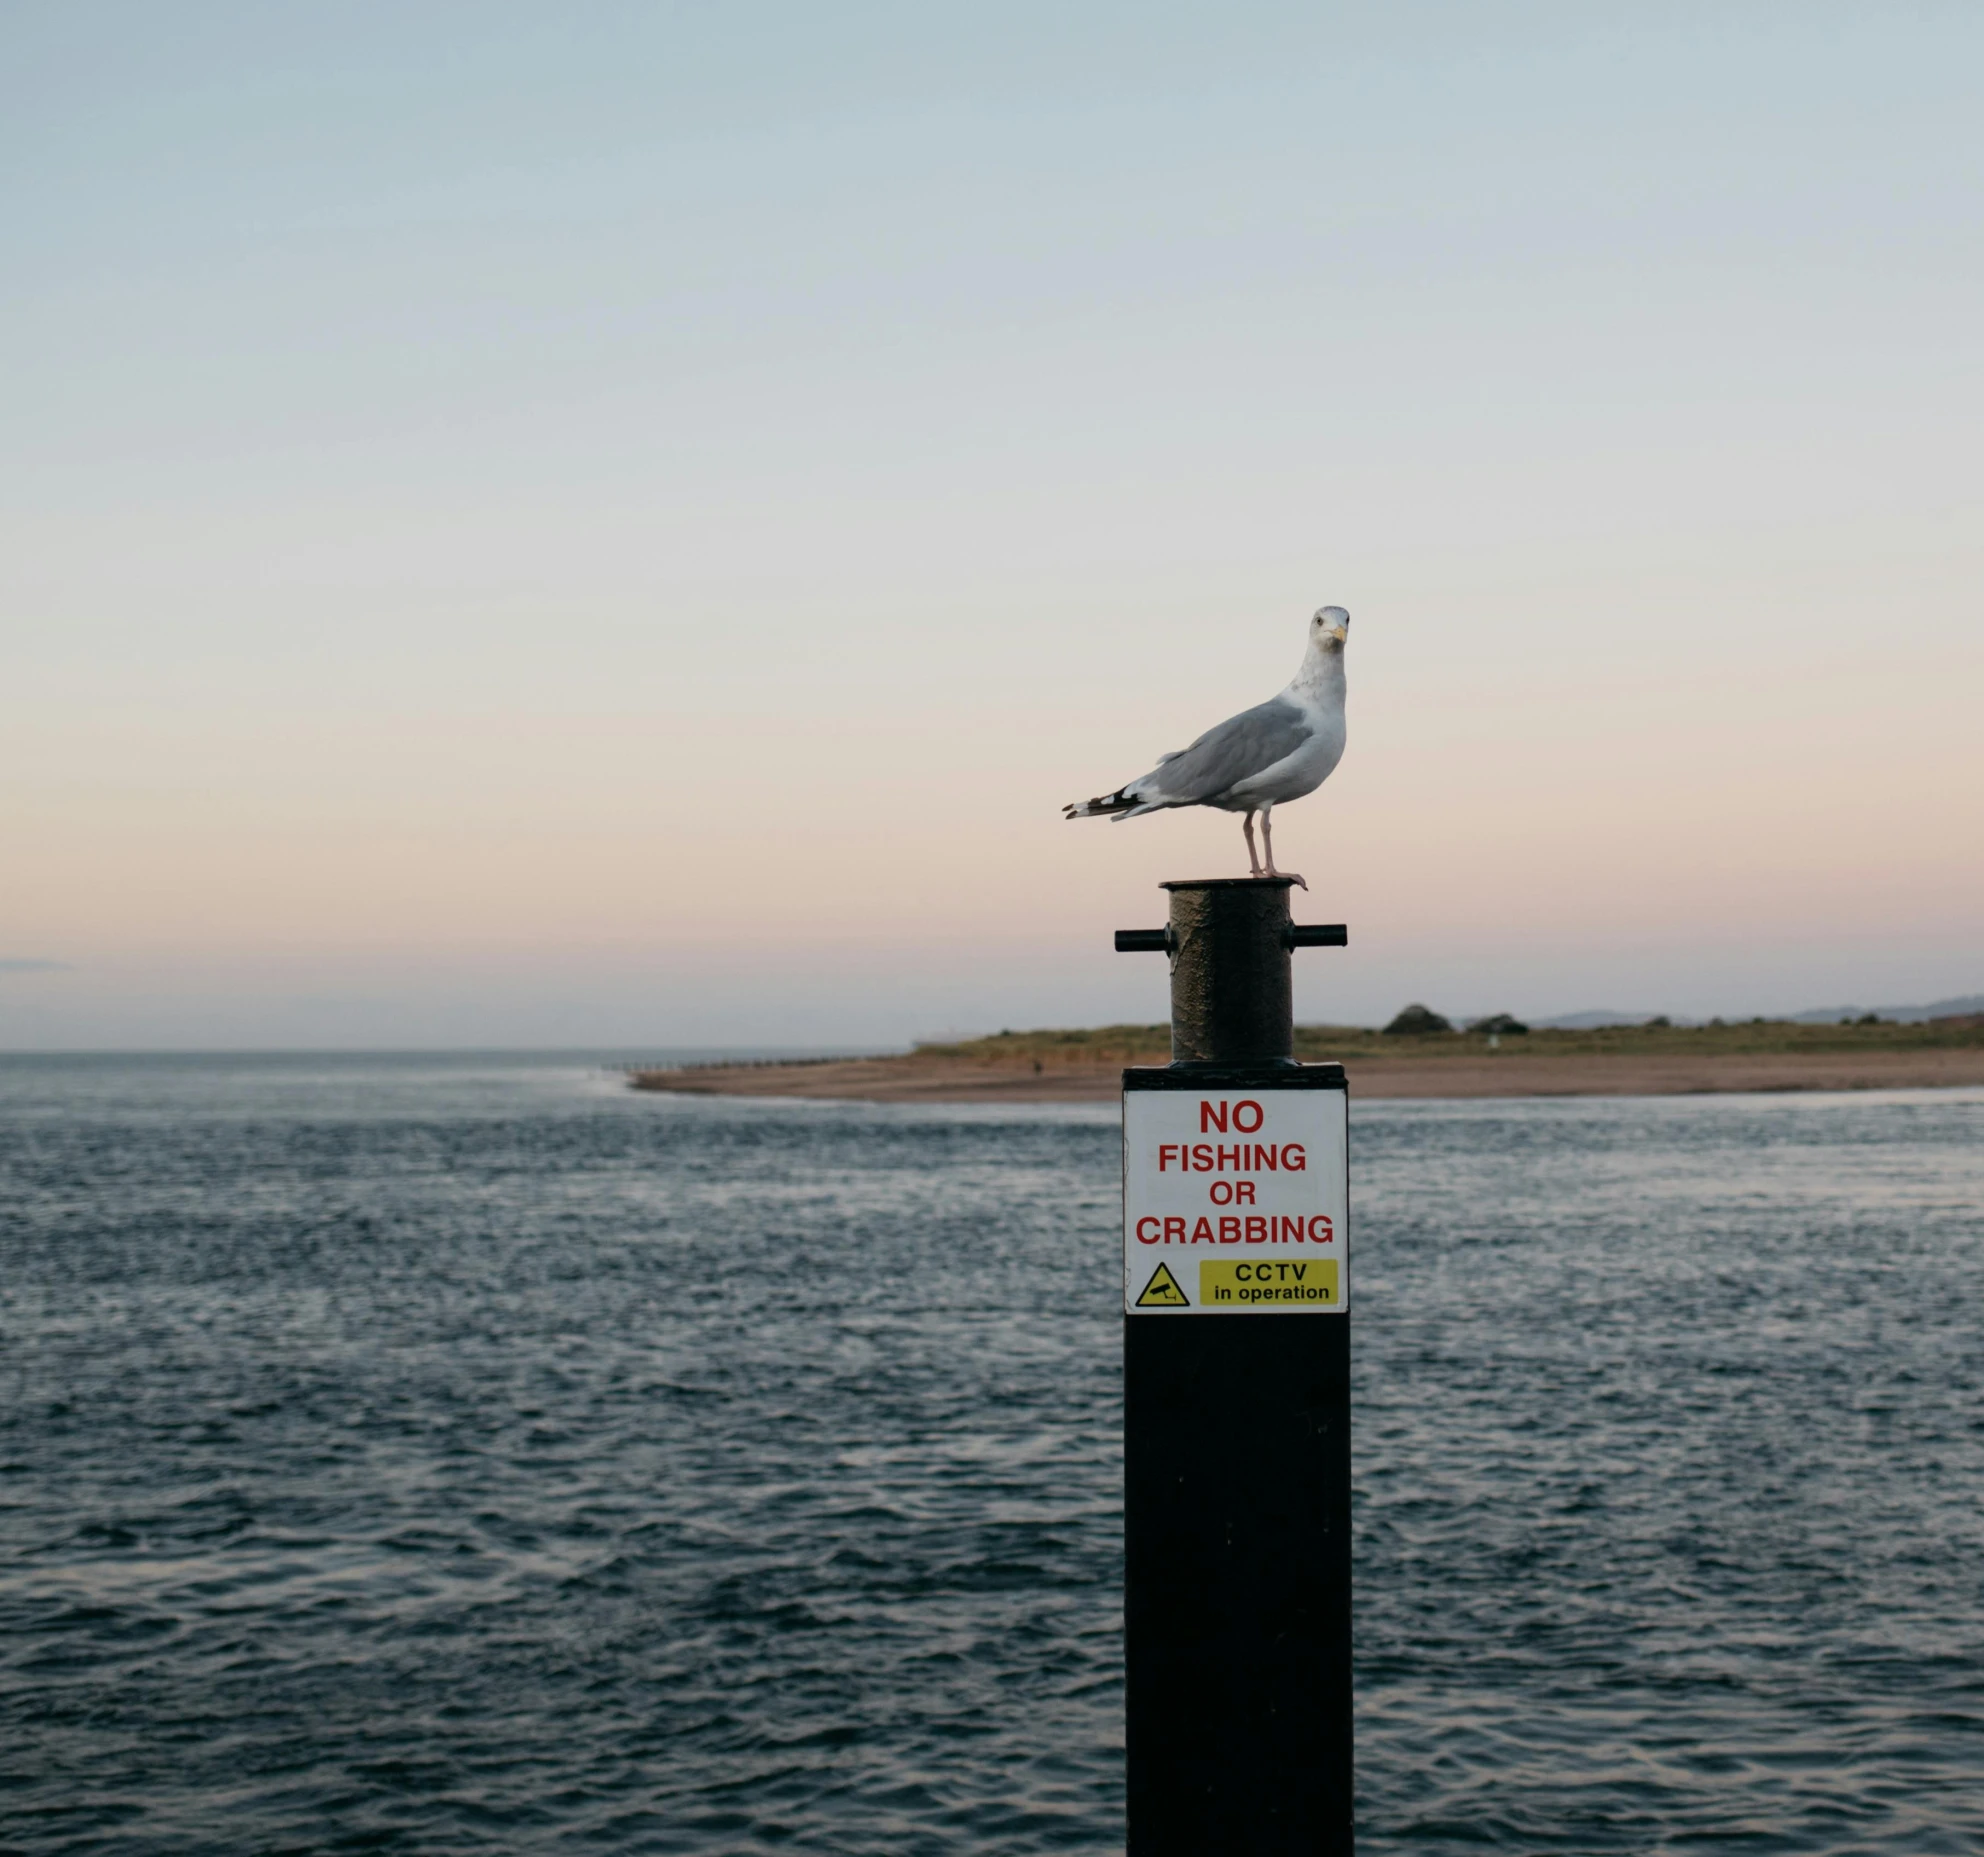 a seagull sitting on top of a pole next to a body of water, happening, near the sea, evening time, on a pedestal, unsplash photography